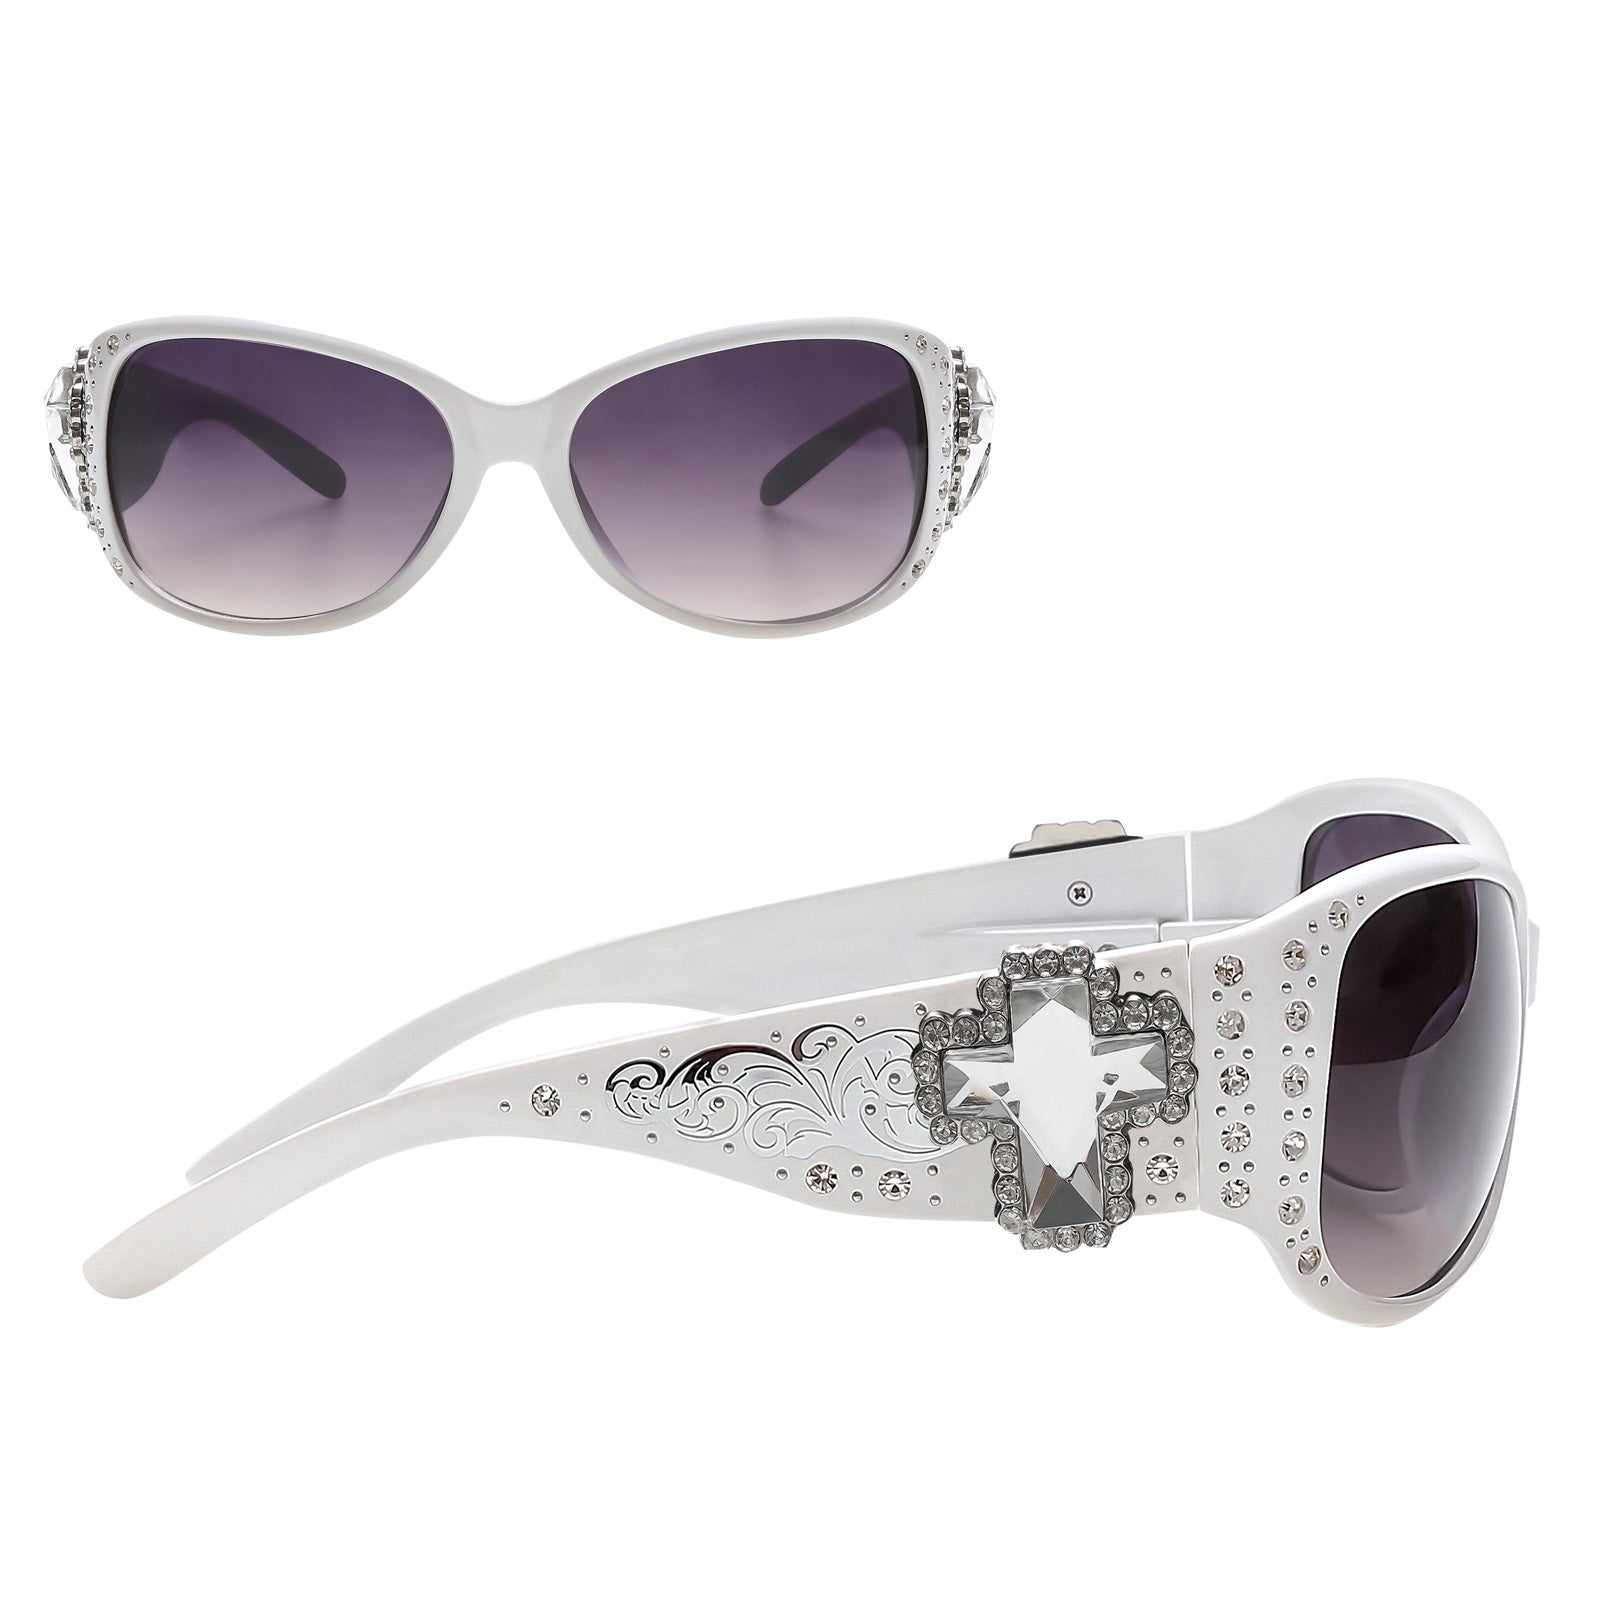 Montana West Spiritual Collection Sunglasses - Cowgirl Wear